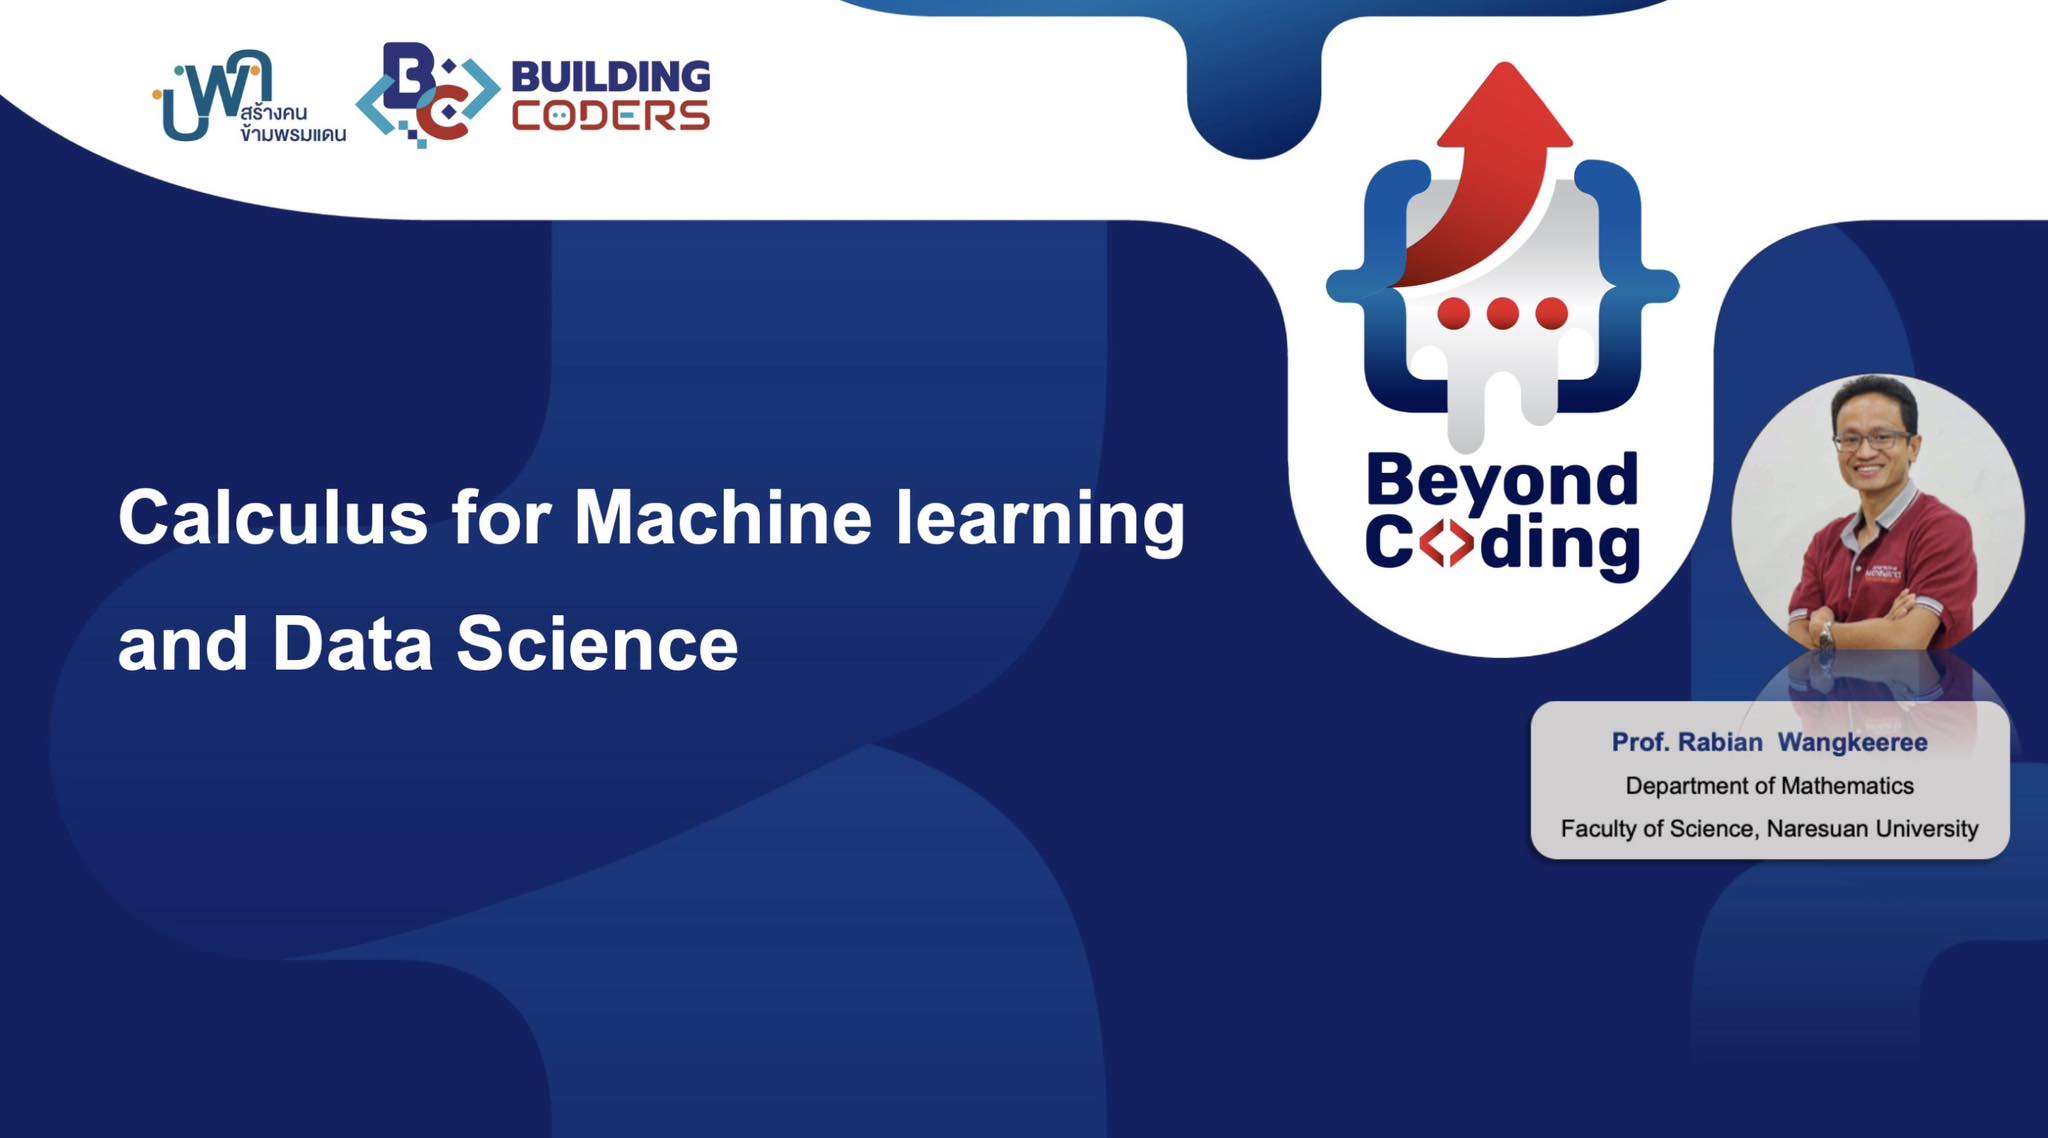 Beyond Coding: Calculus for Machine learning